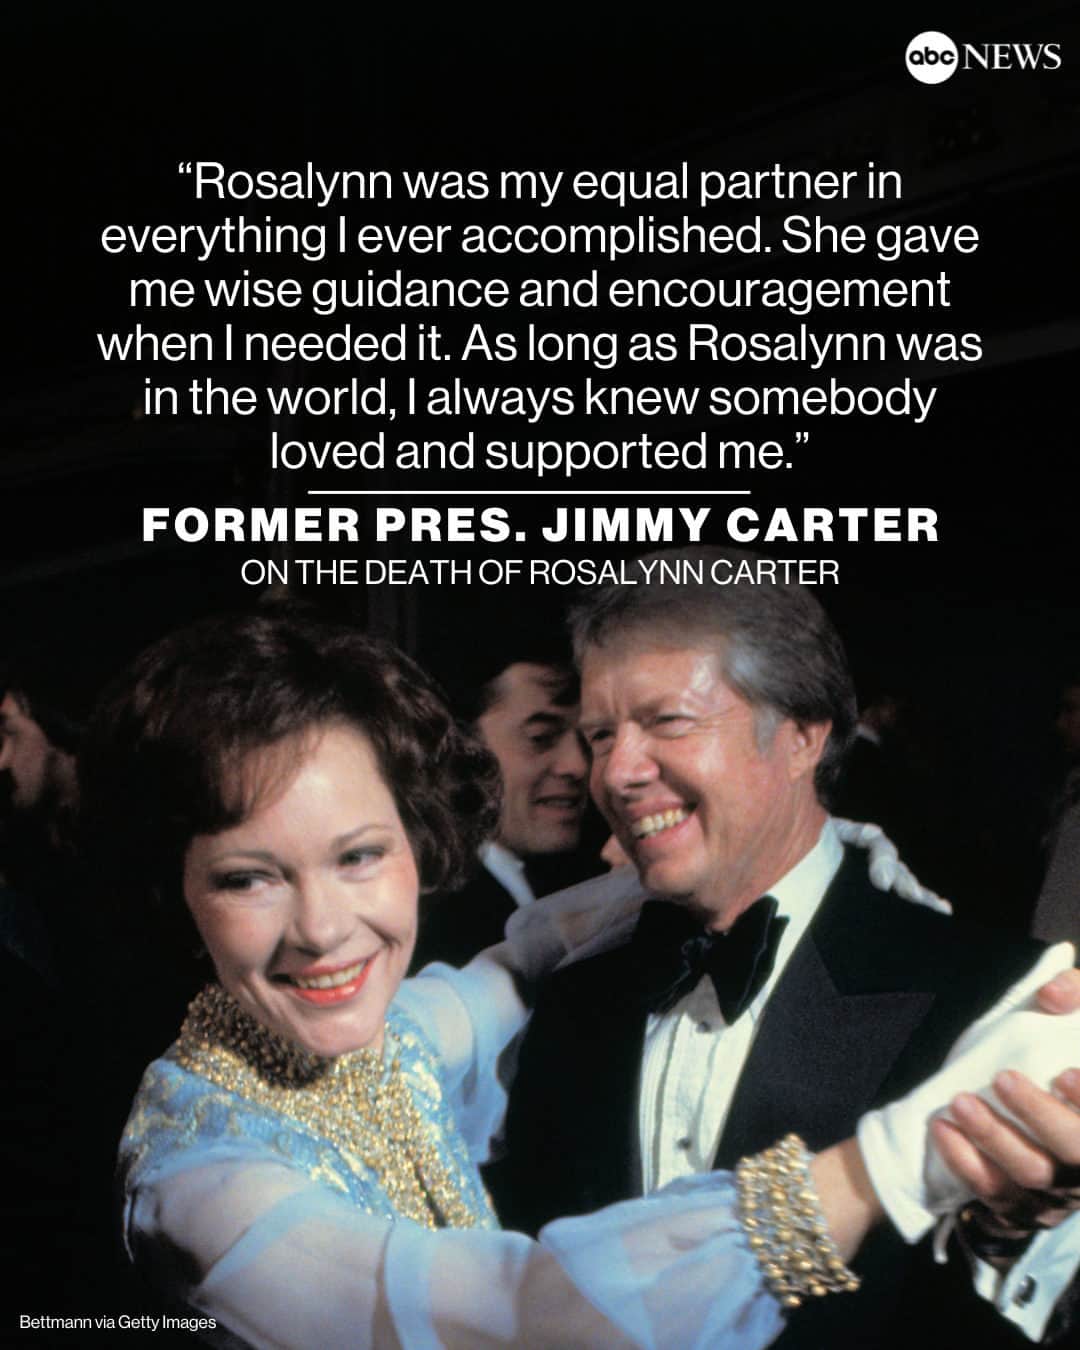 ABC Newsのインスタグラム：「Former first lady Rosalynn Carter, the wife of former Pres. Jimmy Carter and a devoted advocate for mental health, died on Sunday, the Carter Center announced. She was 96.  "Rosalynn was my equal partner in everything I ever accomplished," Jimmy Carter said in a statement. "She gave me wise guidance and encouragement when I needed it. As long as Rosalynn was in the world, I always knew somebody loved and supported me."  More about her life and legacy at the link in bio.」